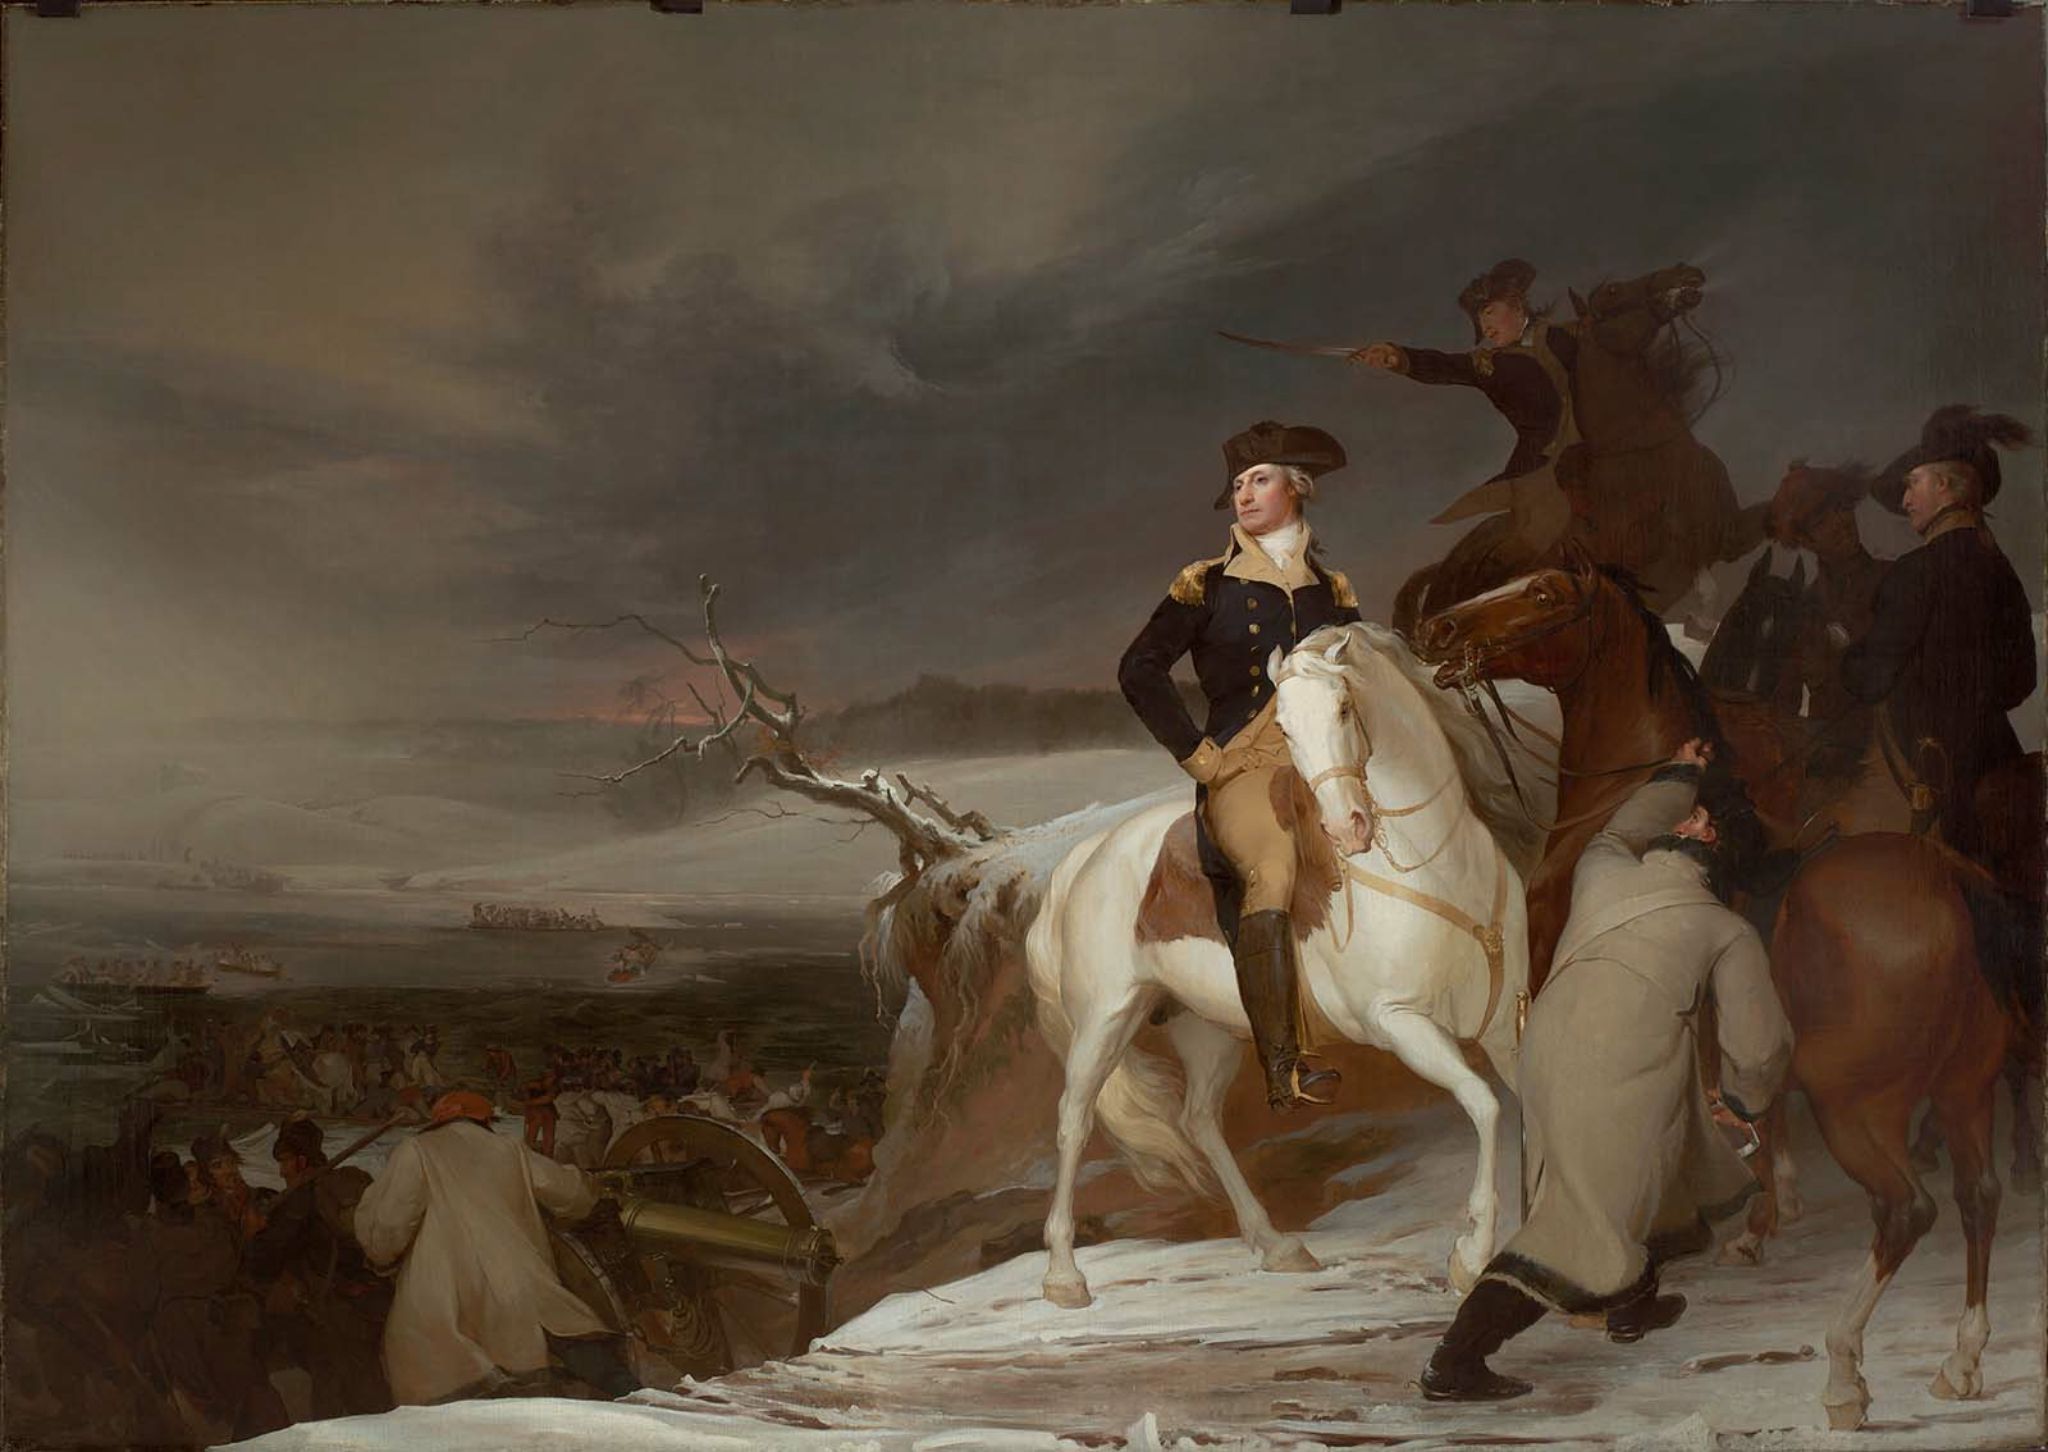 Passage of the Delaware, by Thomas Sully (1819). Now in the Boston Museum of Fine Arts.